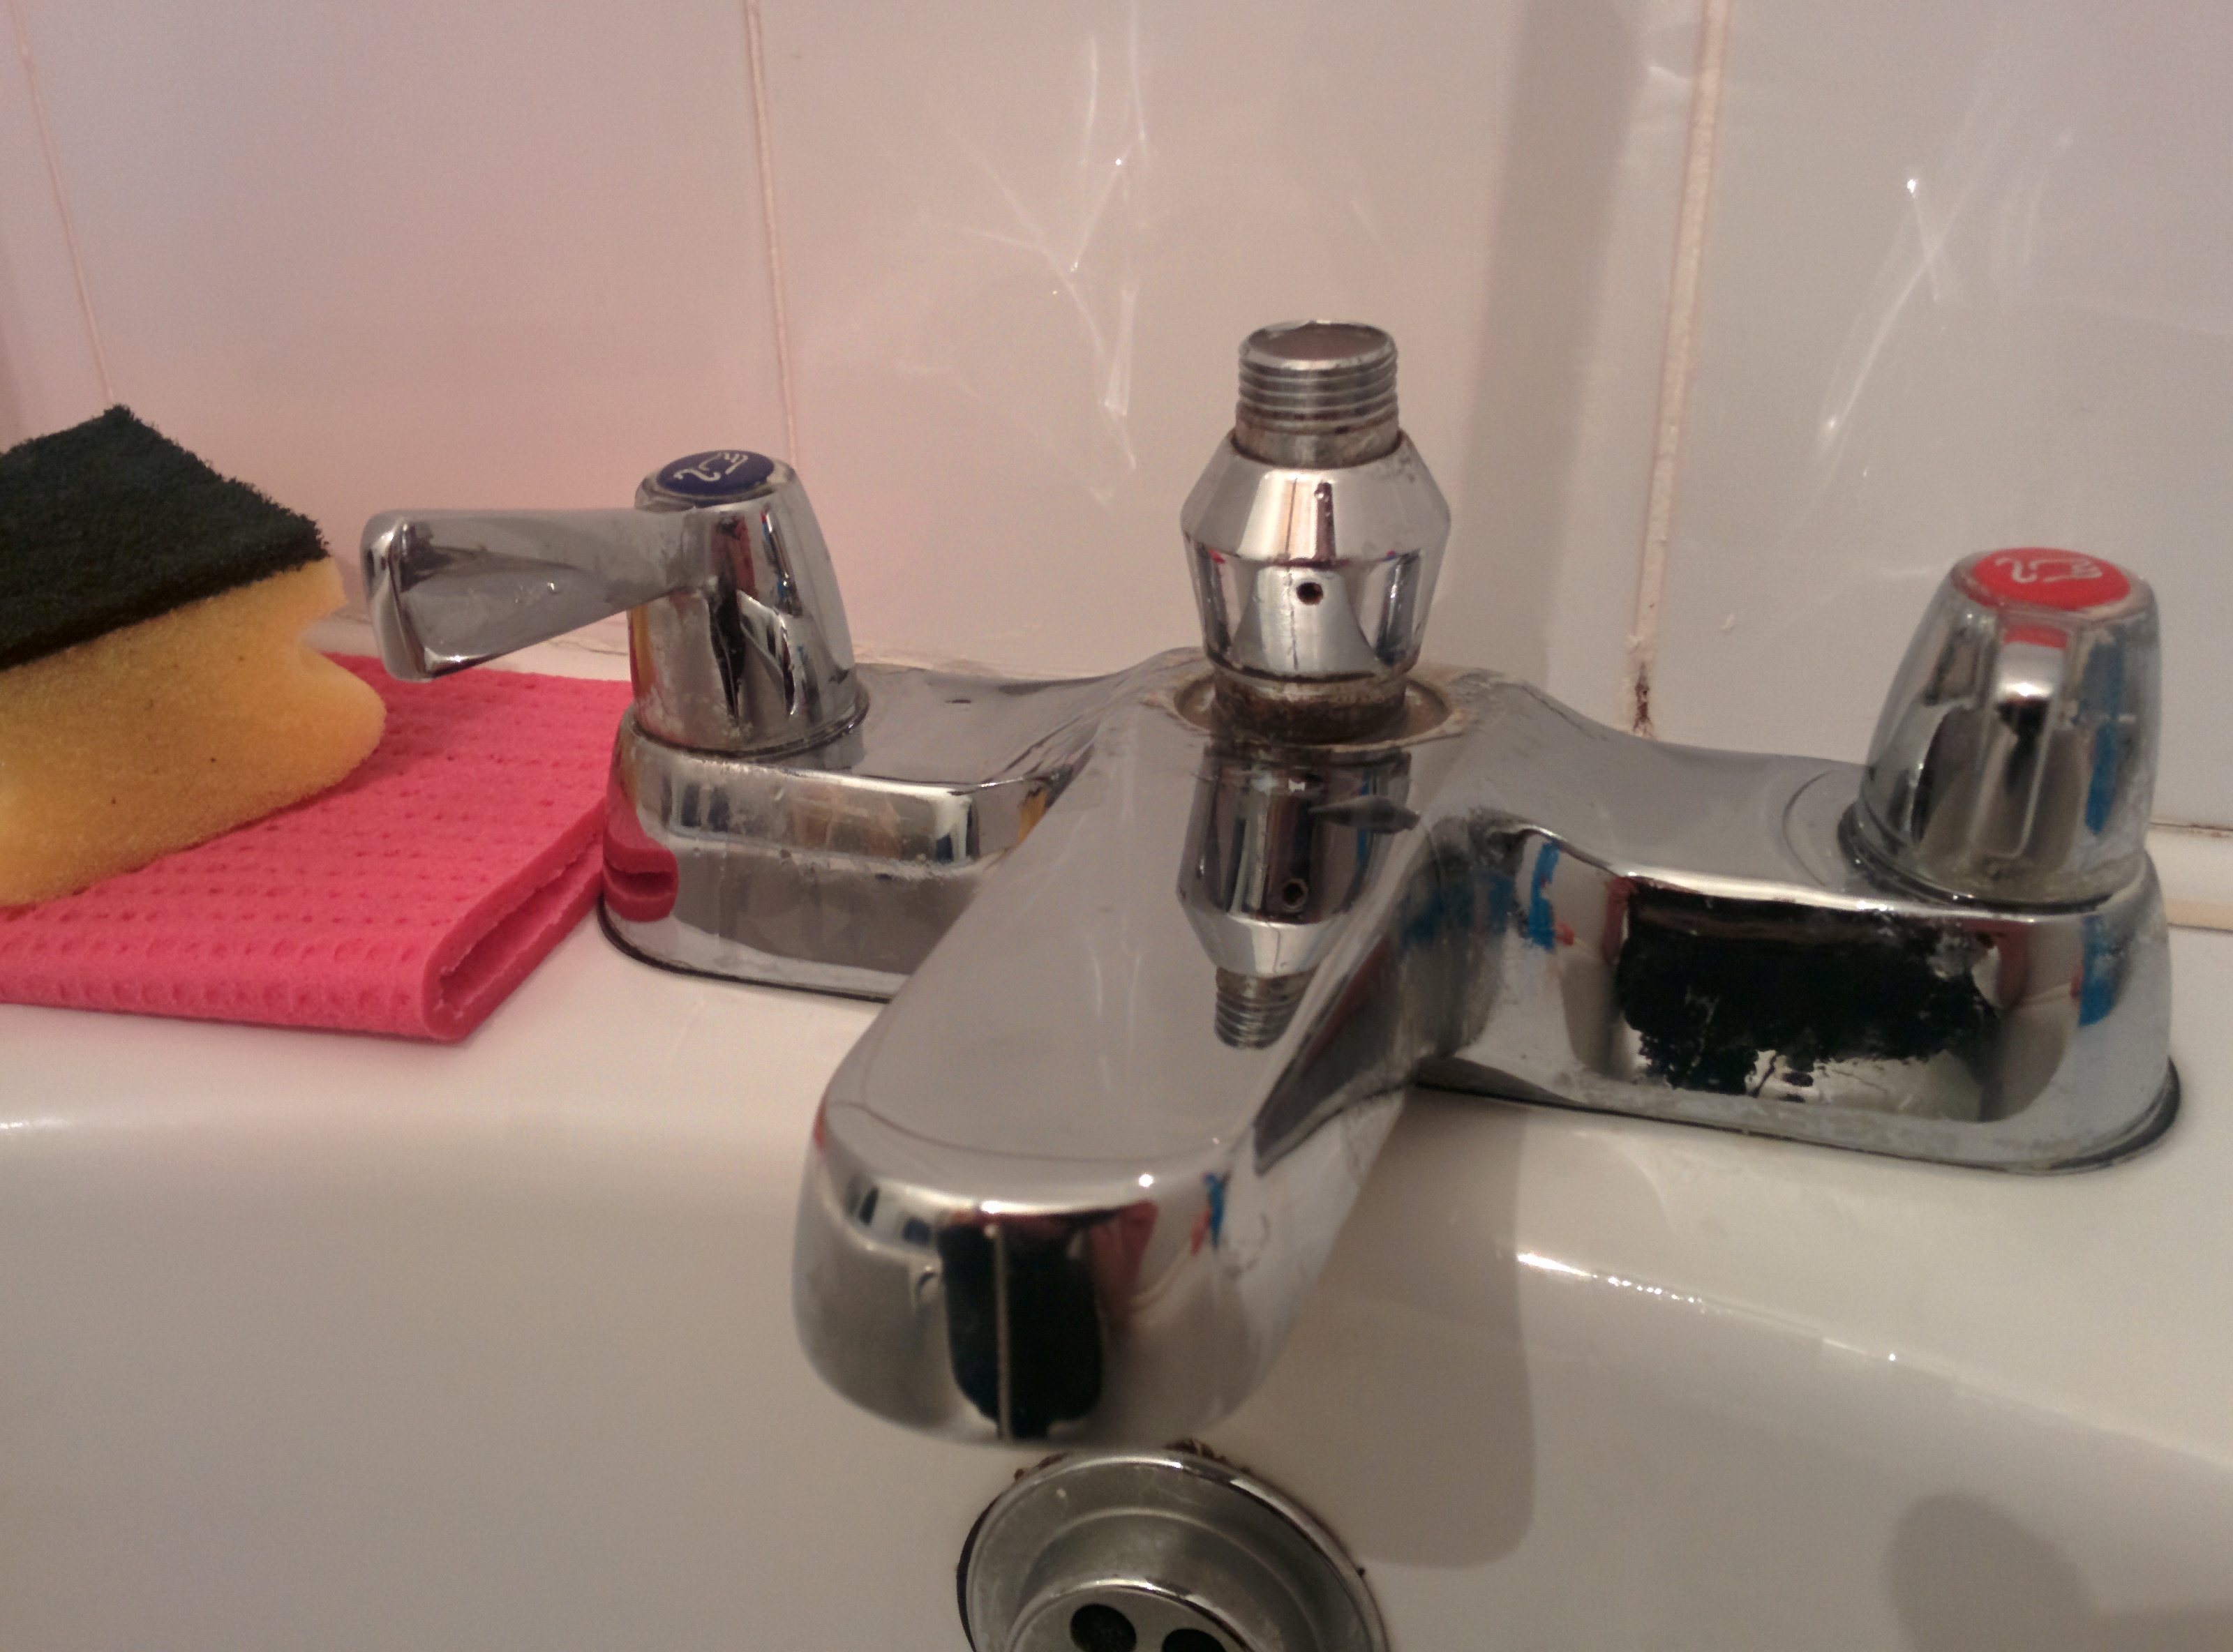 How do I fix a combined faucet mixer and push down shower